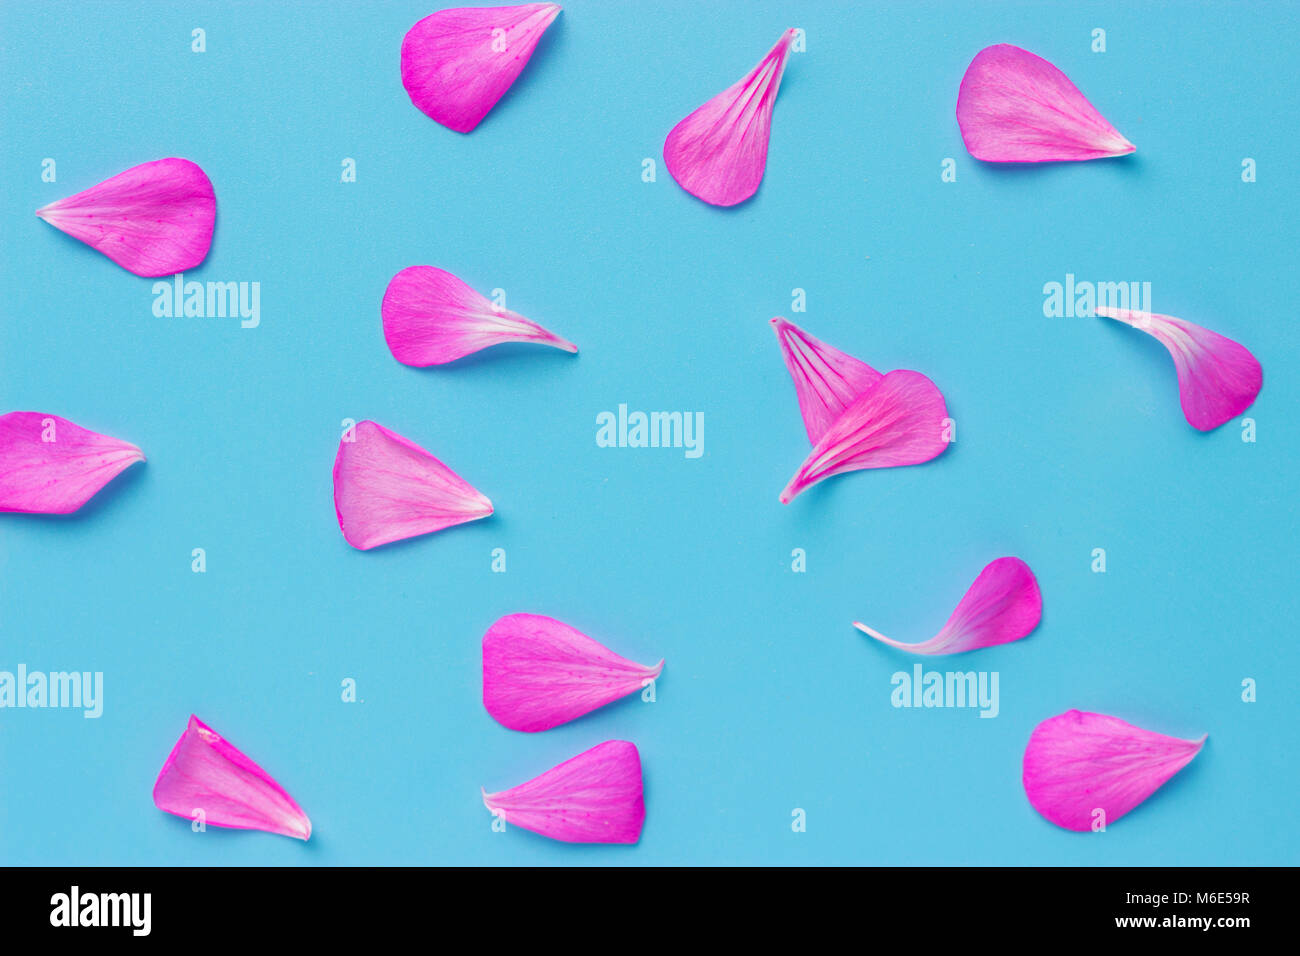 Pink rose petals. Valentine's day background. Flat lay, top view Stock Photo